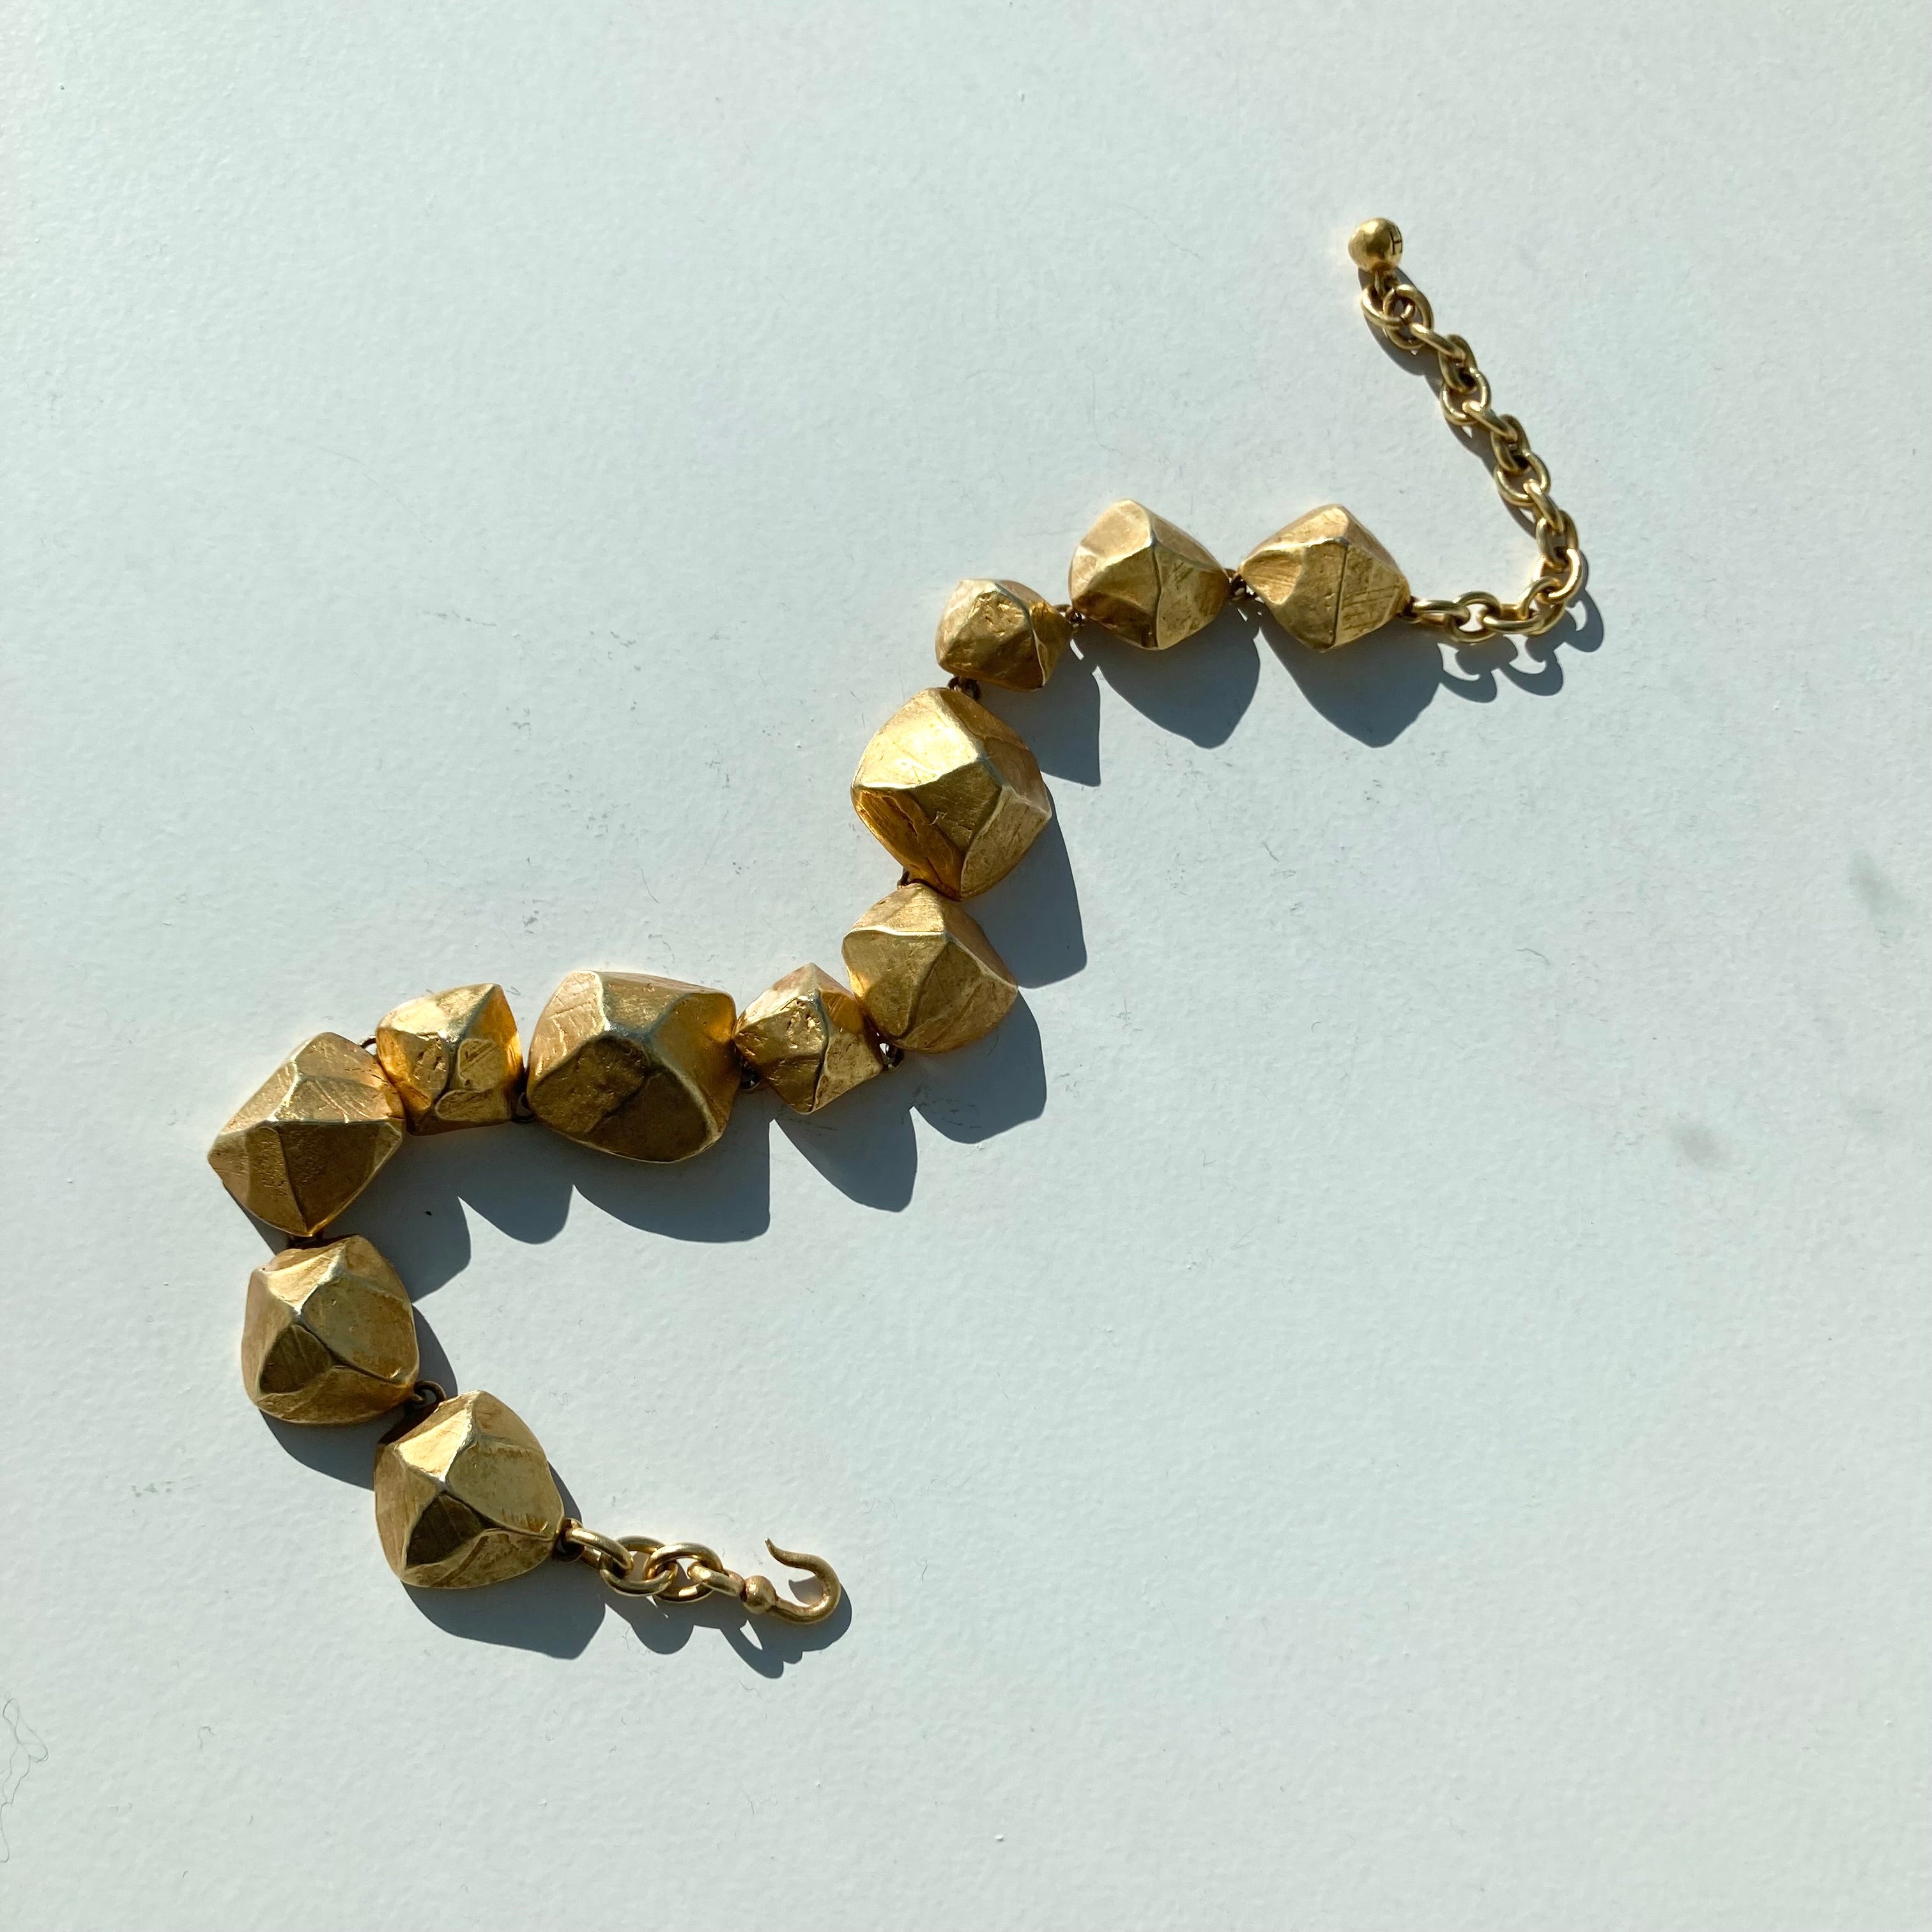 70s Hermes Nugget necklace vintage エルメス ナゲット ネックレス ...